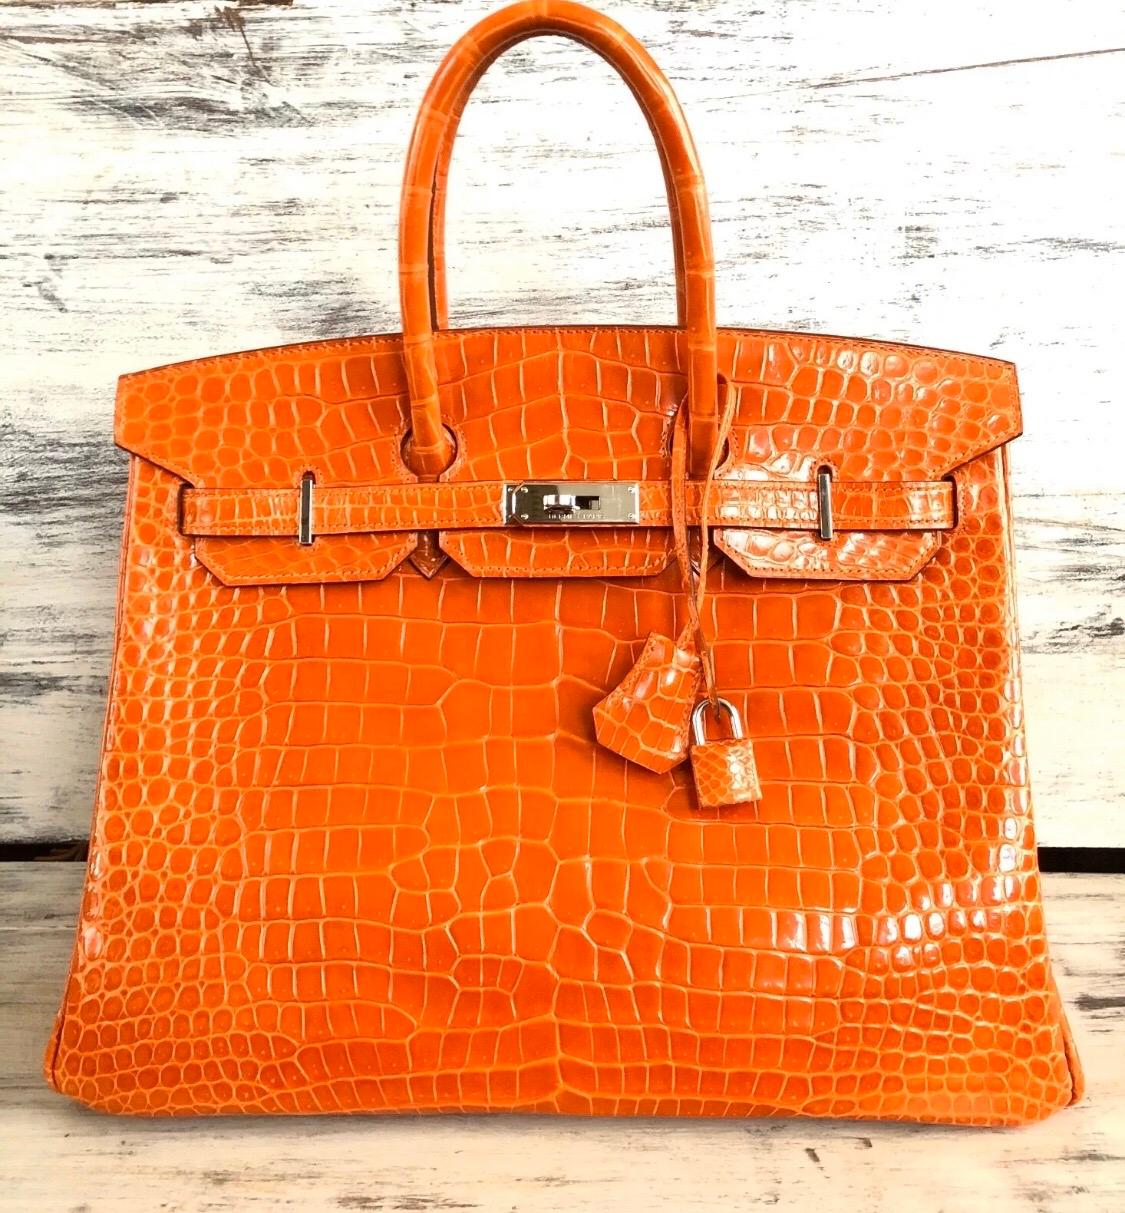 
Pristine Hermes Birkin 35 Porosus Crocodile Fire Orange Palladium Hardware. O stamp 2011. Excellent Condition Light Hairlines on Hardware. Best Price on eBay! Includes Lock, Clochette and Dust Bag. From Collectors Closet.

Shop with Confidence from